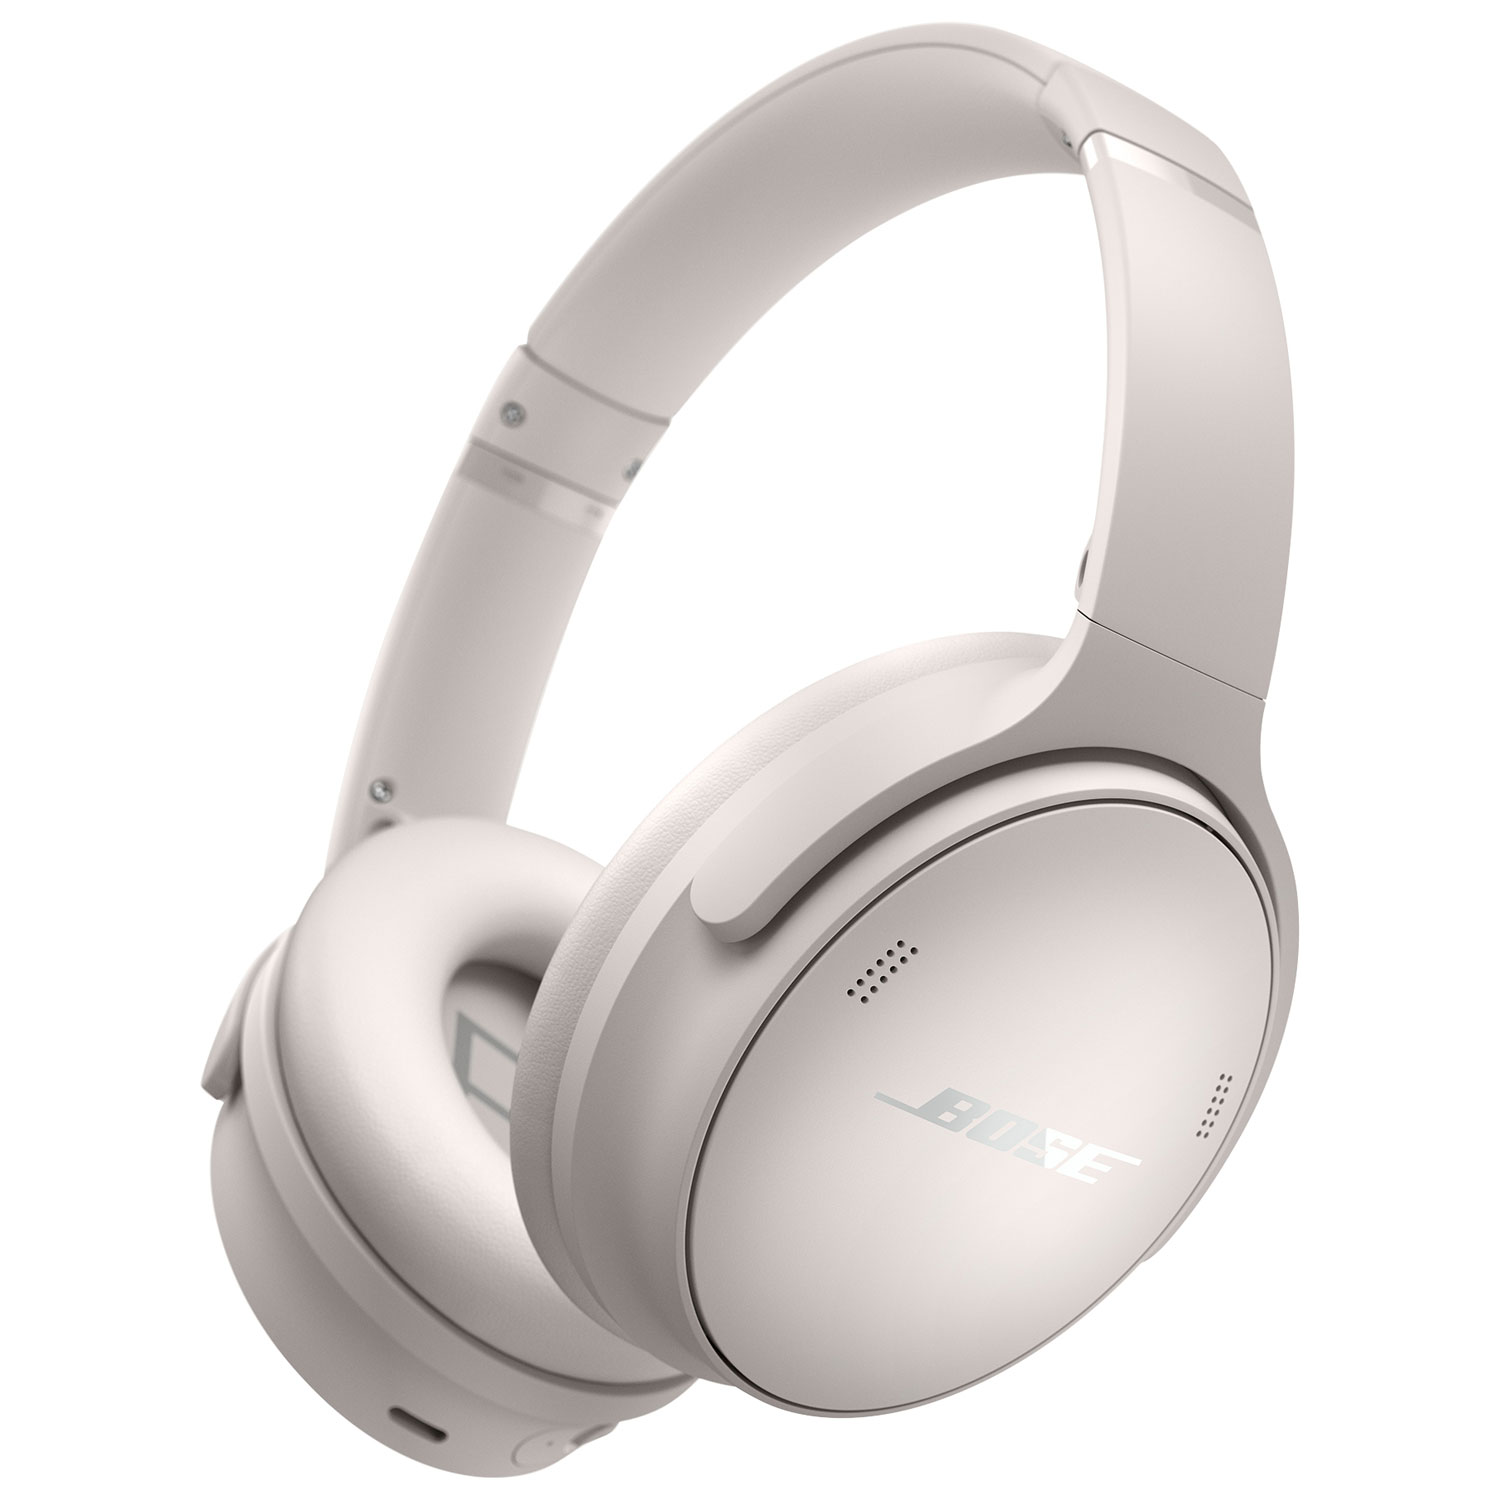 Bose QuietComfort Over-Ear Noise Cancelling Bluetooth Headphones - White Smoke